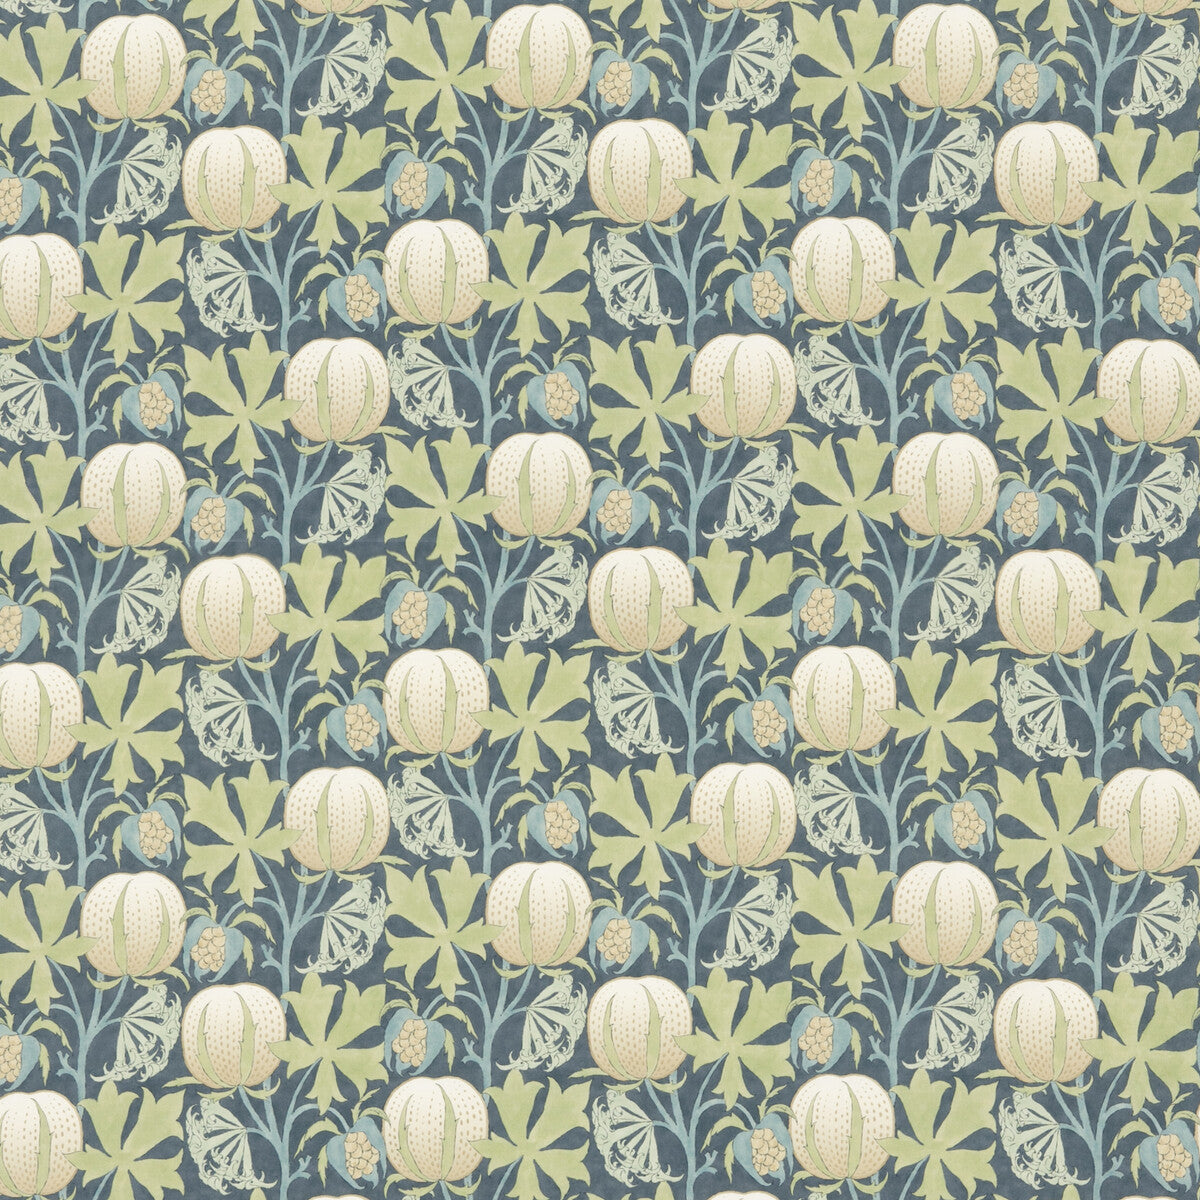 Pumpkins Cotton fabric in green/blue color - pattern BP10973.2.0 - by G P &amp; J Baker in the Original Brantwood Fabric collection